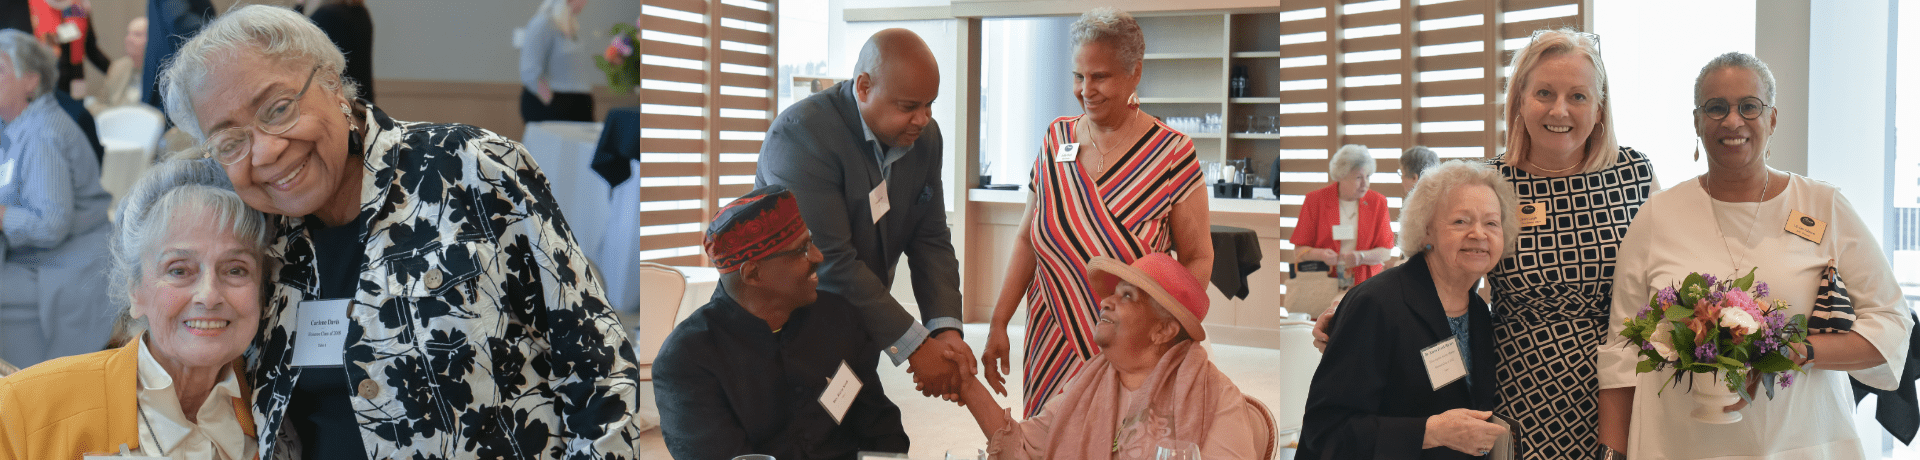 St. Andrew's Charitable Foundation Ageless Society